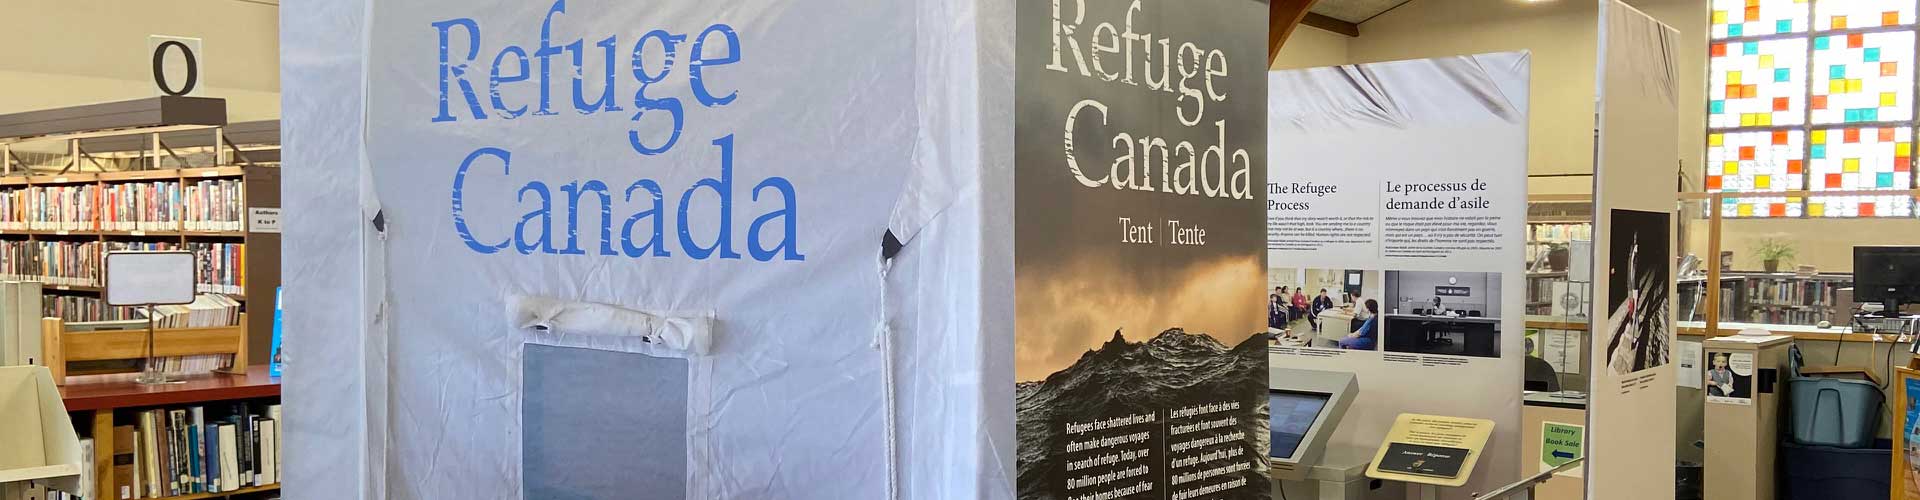 ‘Refuge Canada’ is printed on the grey fabric of a full-size tent panel.